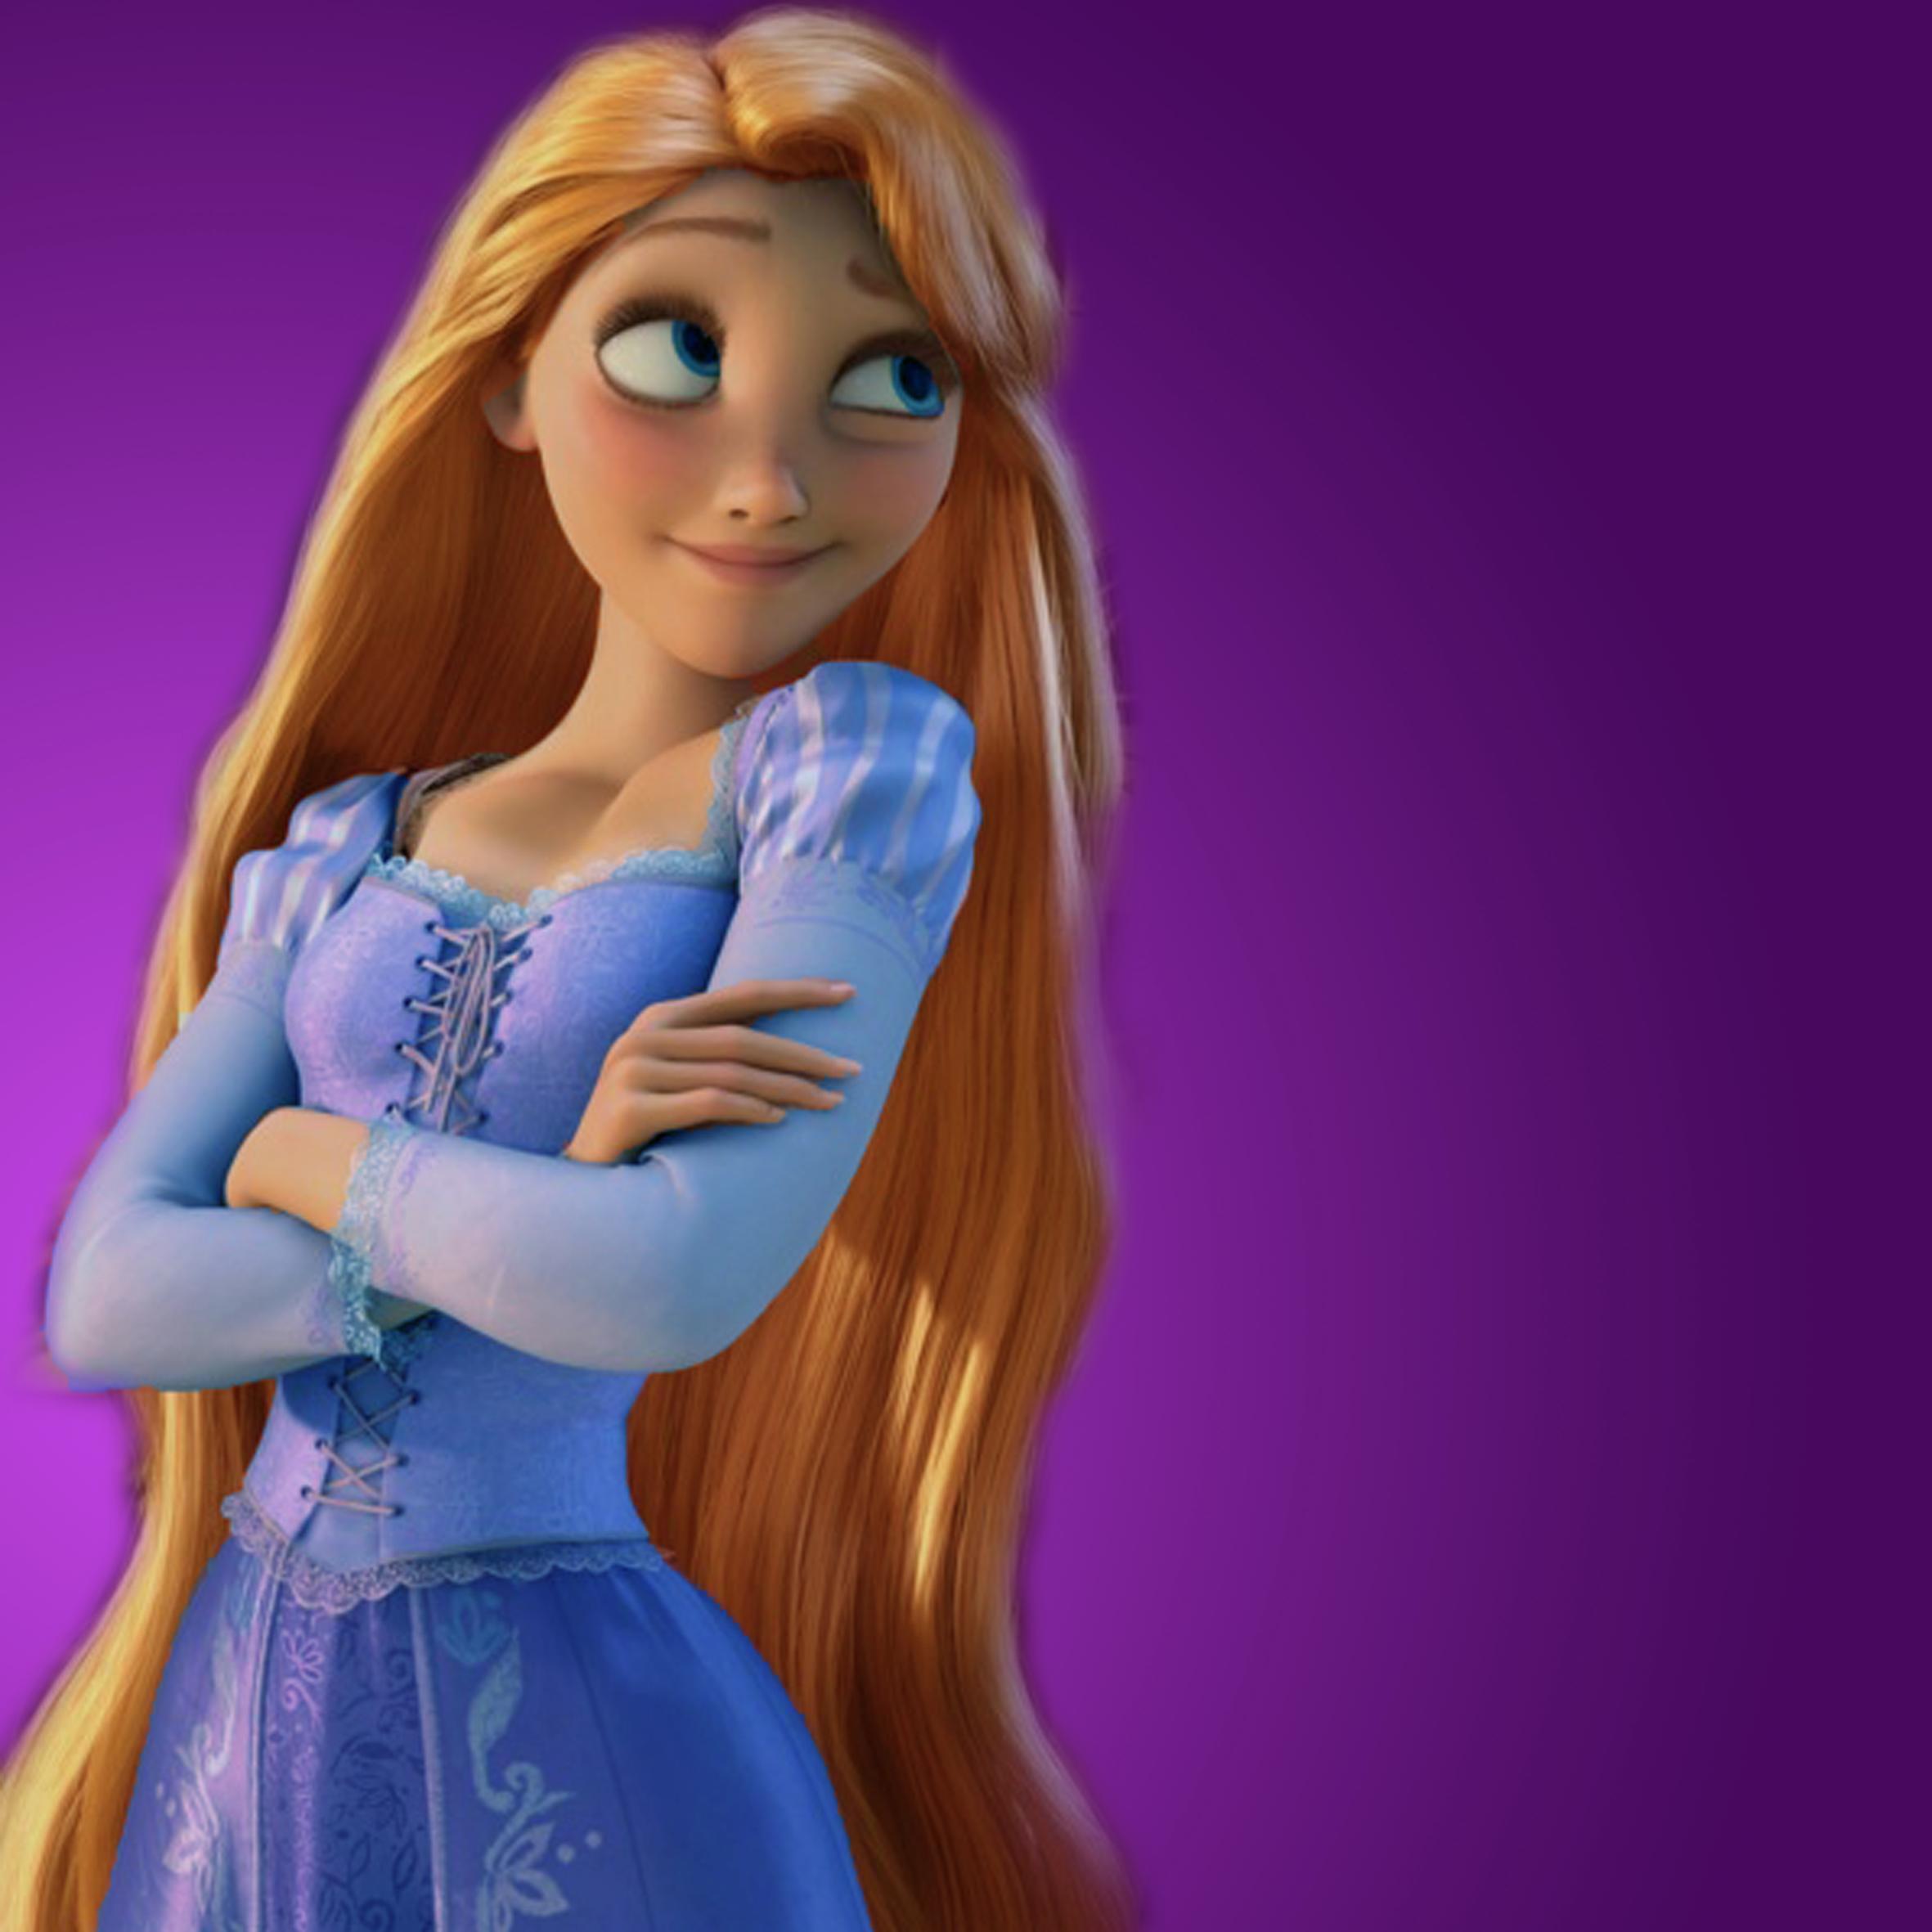 Name's Rapunzel❃I used to be the lost princess❋ Now i'm found and i have a sister @Annabell_disney❤Married to @iGuardianOfFun 18/9/2013❃❤Pregnant{9 months}[RP]